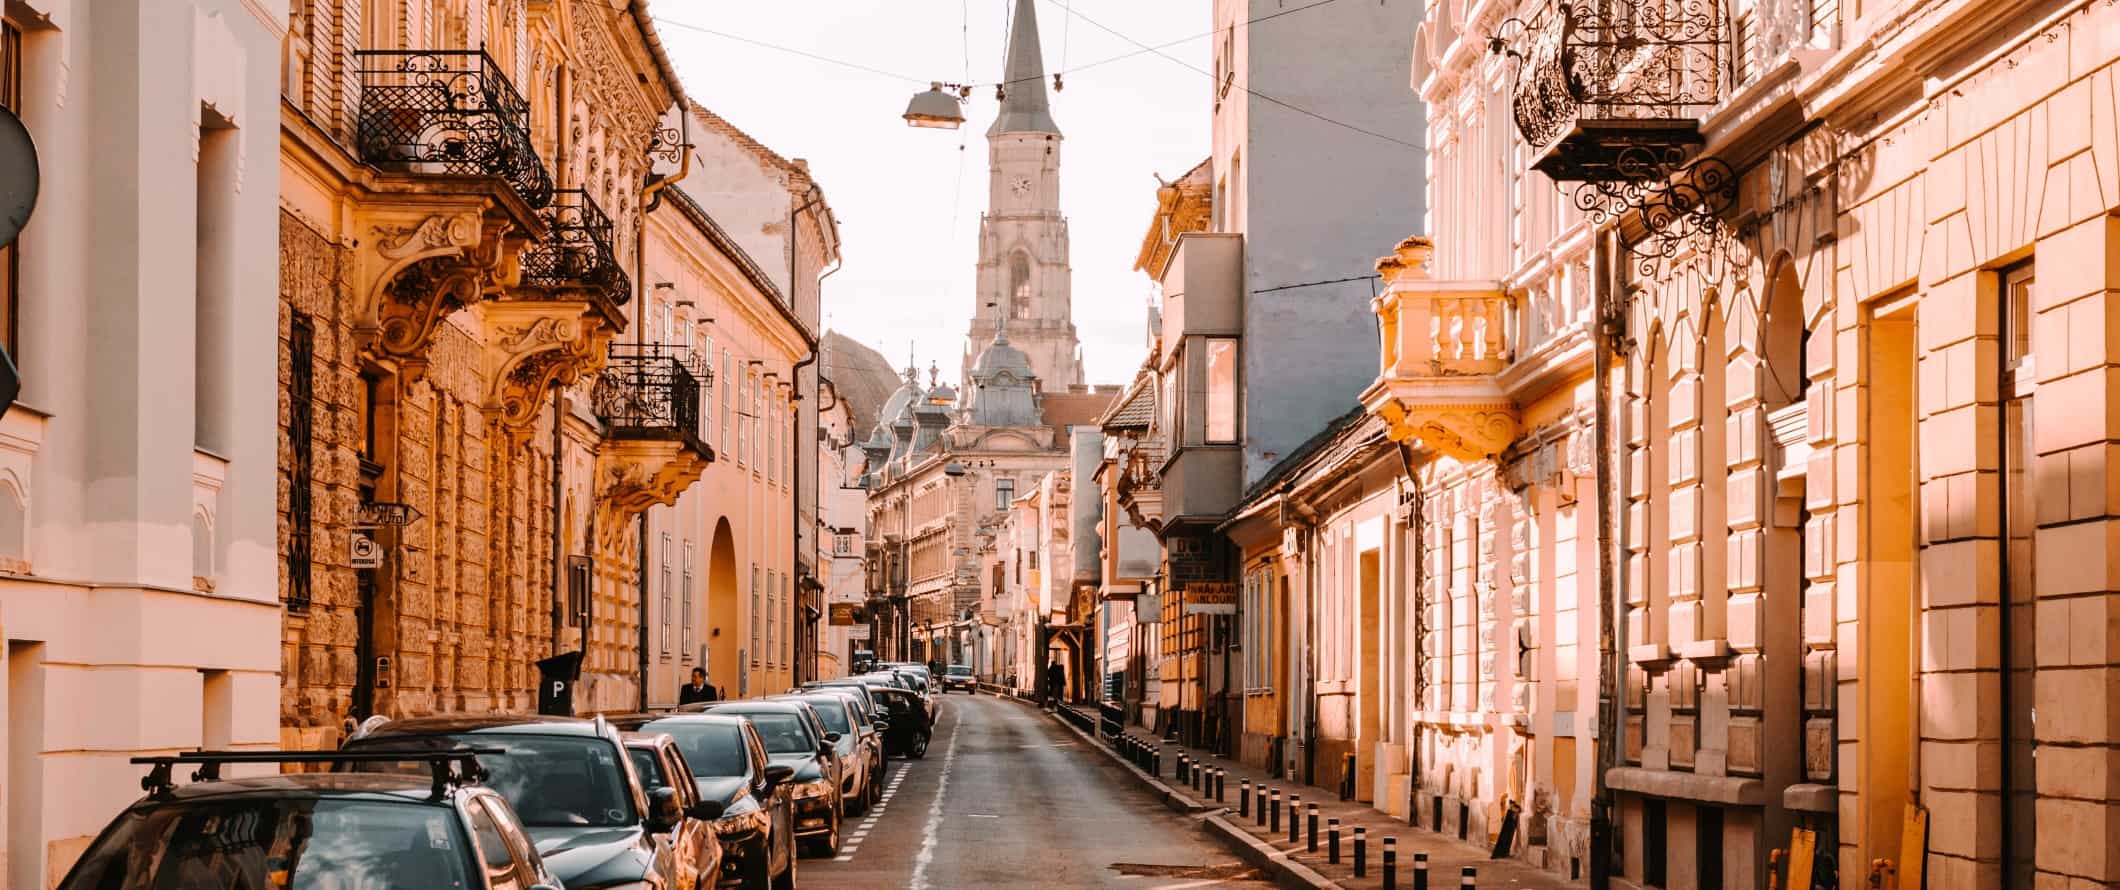 Historic streets in the late afternoon with a church in the background in city of Cluj-Napoca, Romania